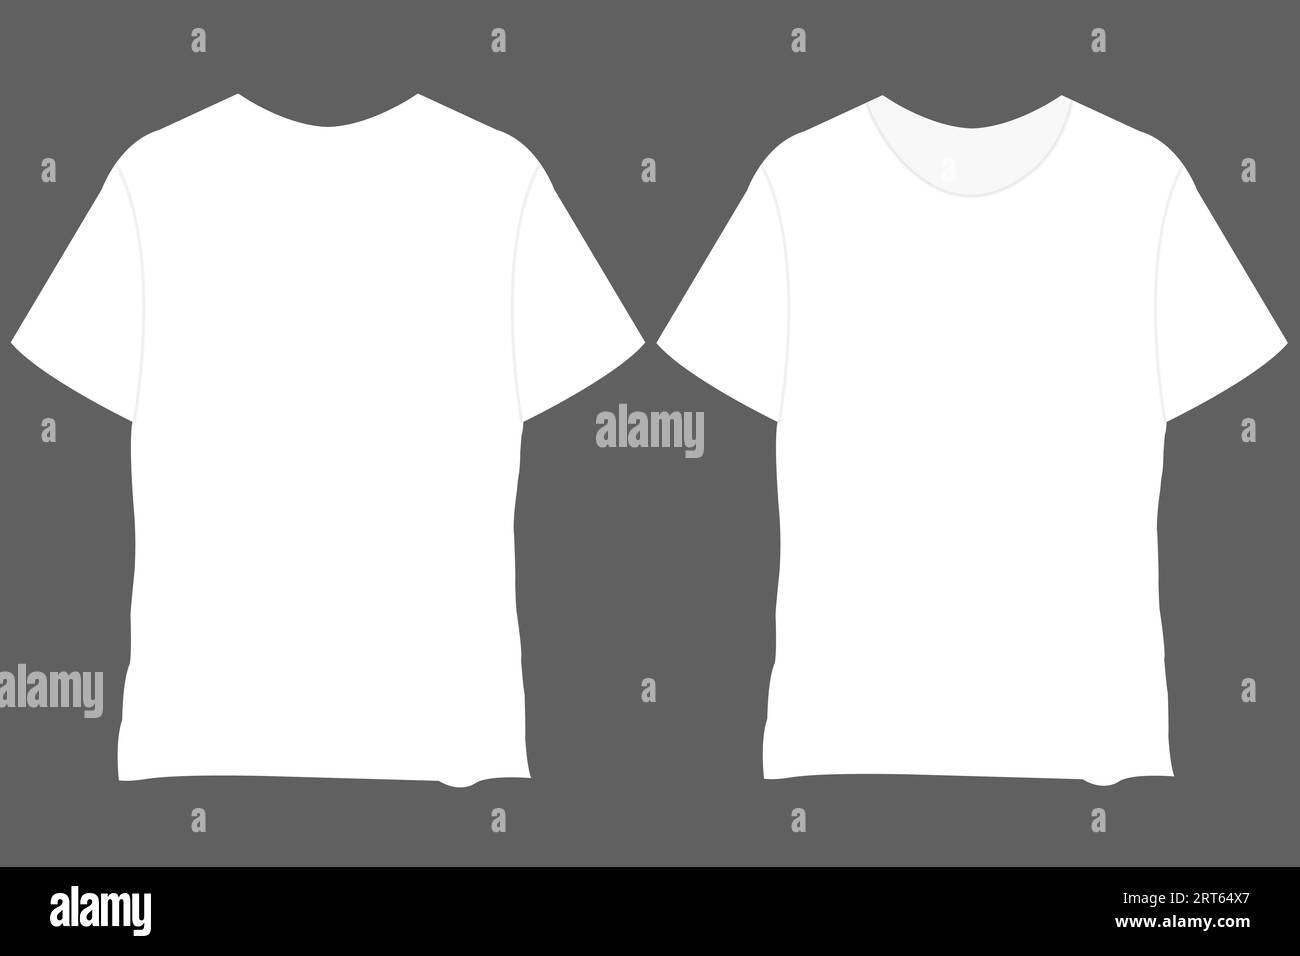 T shirt blank Stock Vector Images - Page 2 - Alamy